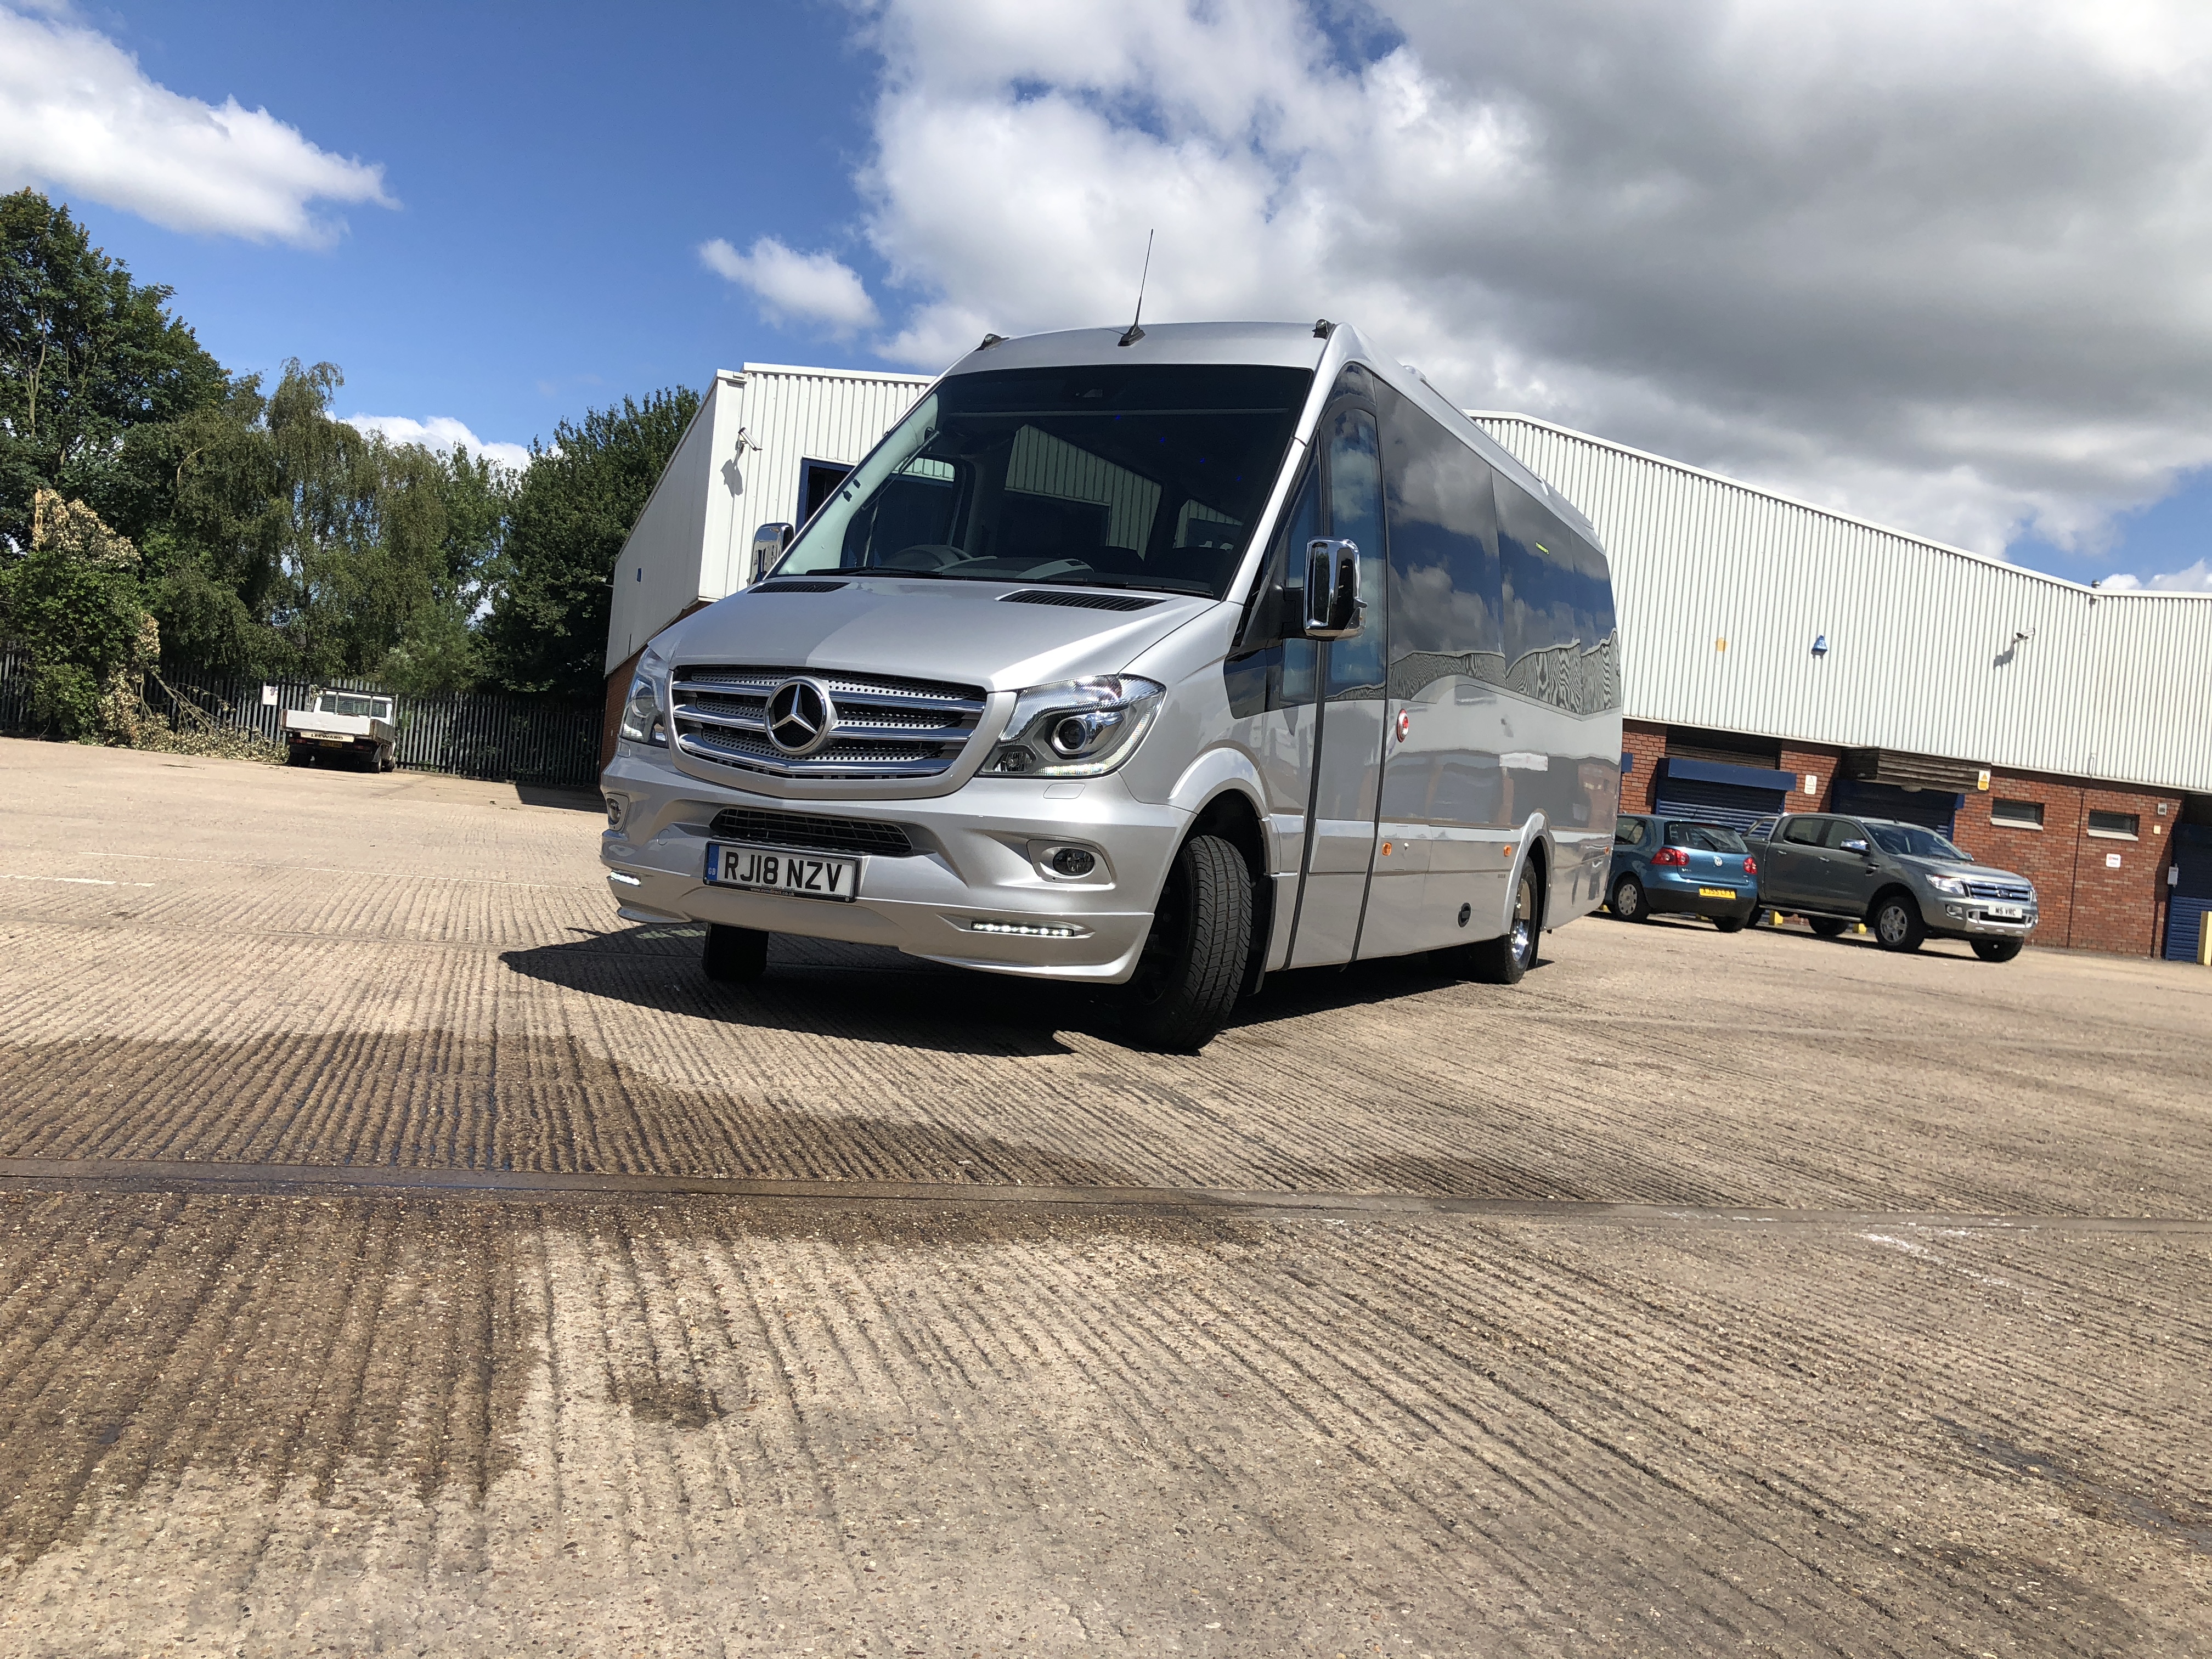 Hire a 20 seater Midibus (Mercedes  Sprinter  2017) from Bouden coach travel  in Birmingham  